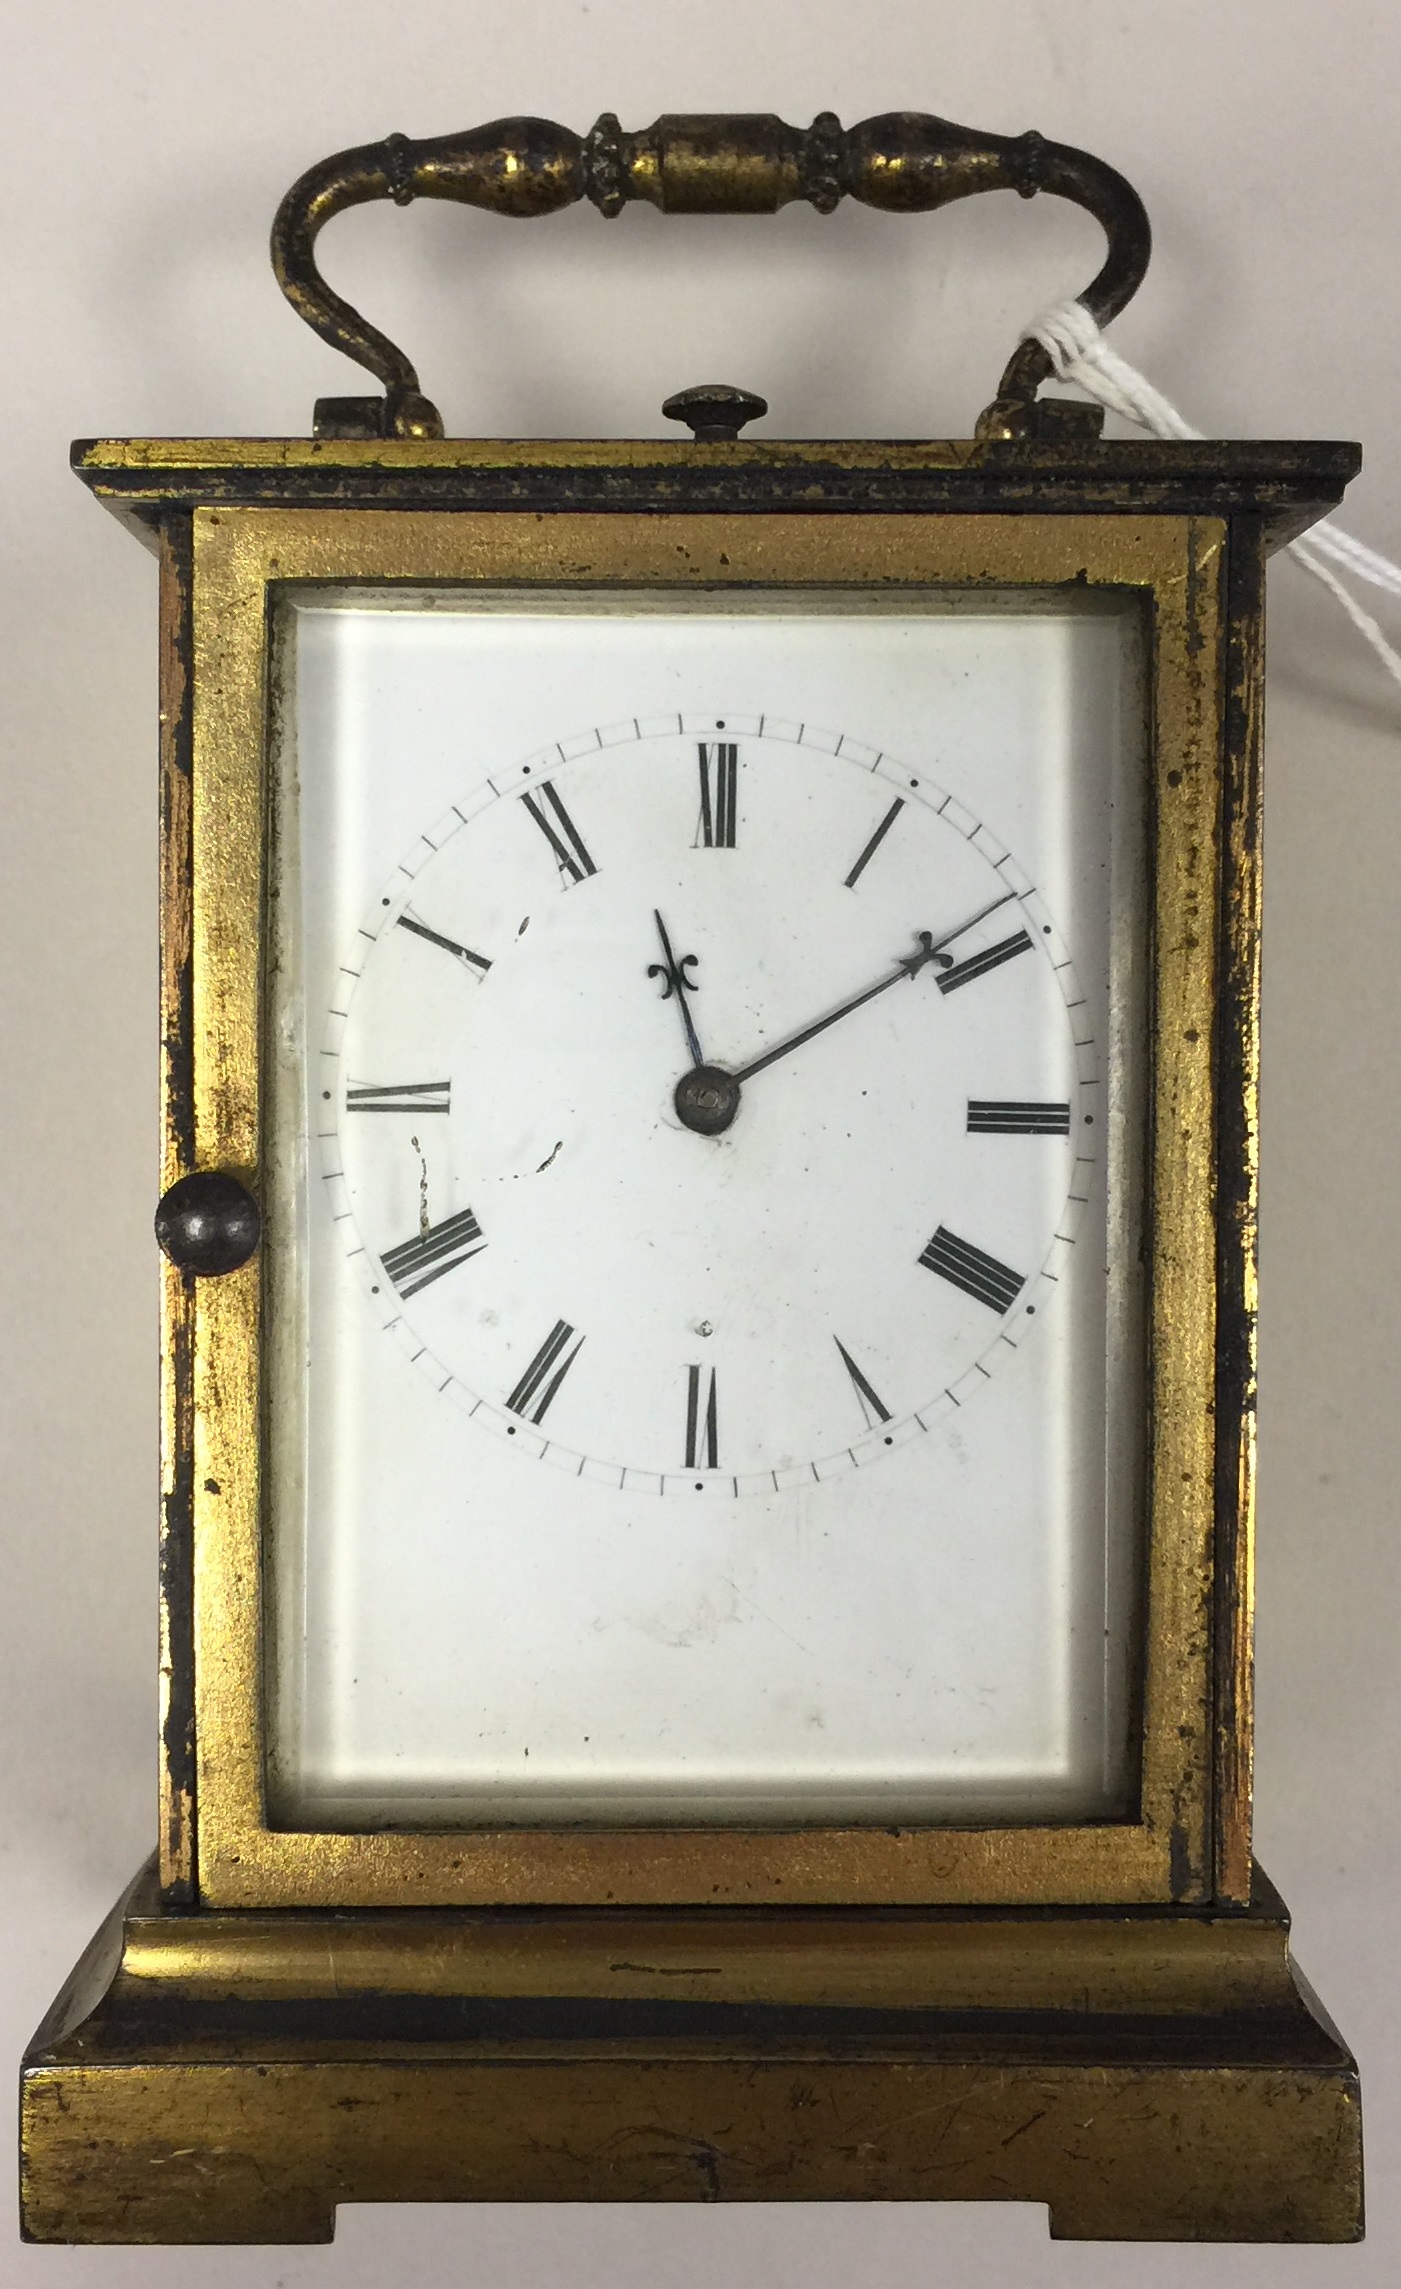 ENGLISH 19TH CENTURY CARRIAGE CLOCK. A gilt English fusee carriage clock repeater, dated to 1880.